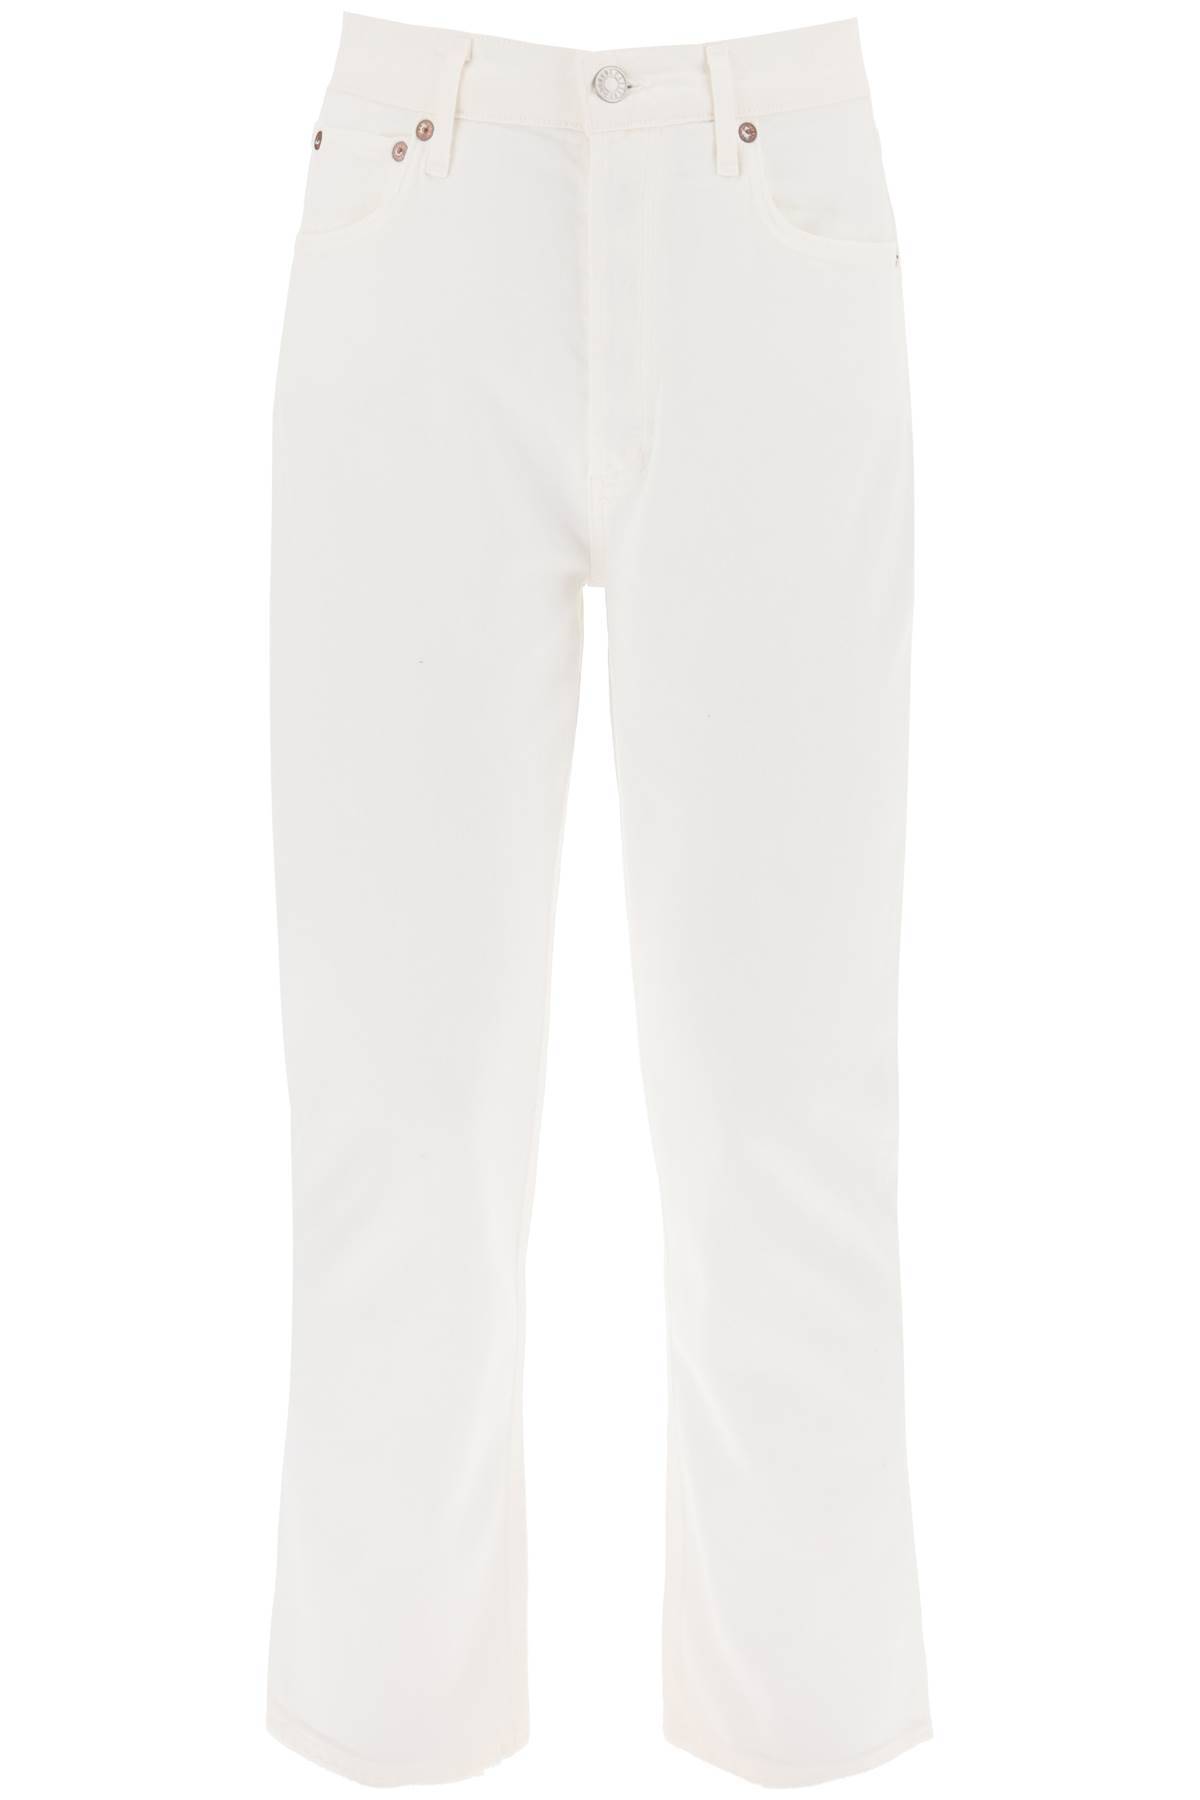 AGOLDE AGOLDE riley high-waisted cropped jeans